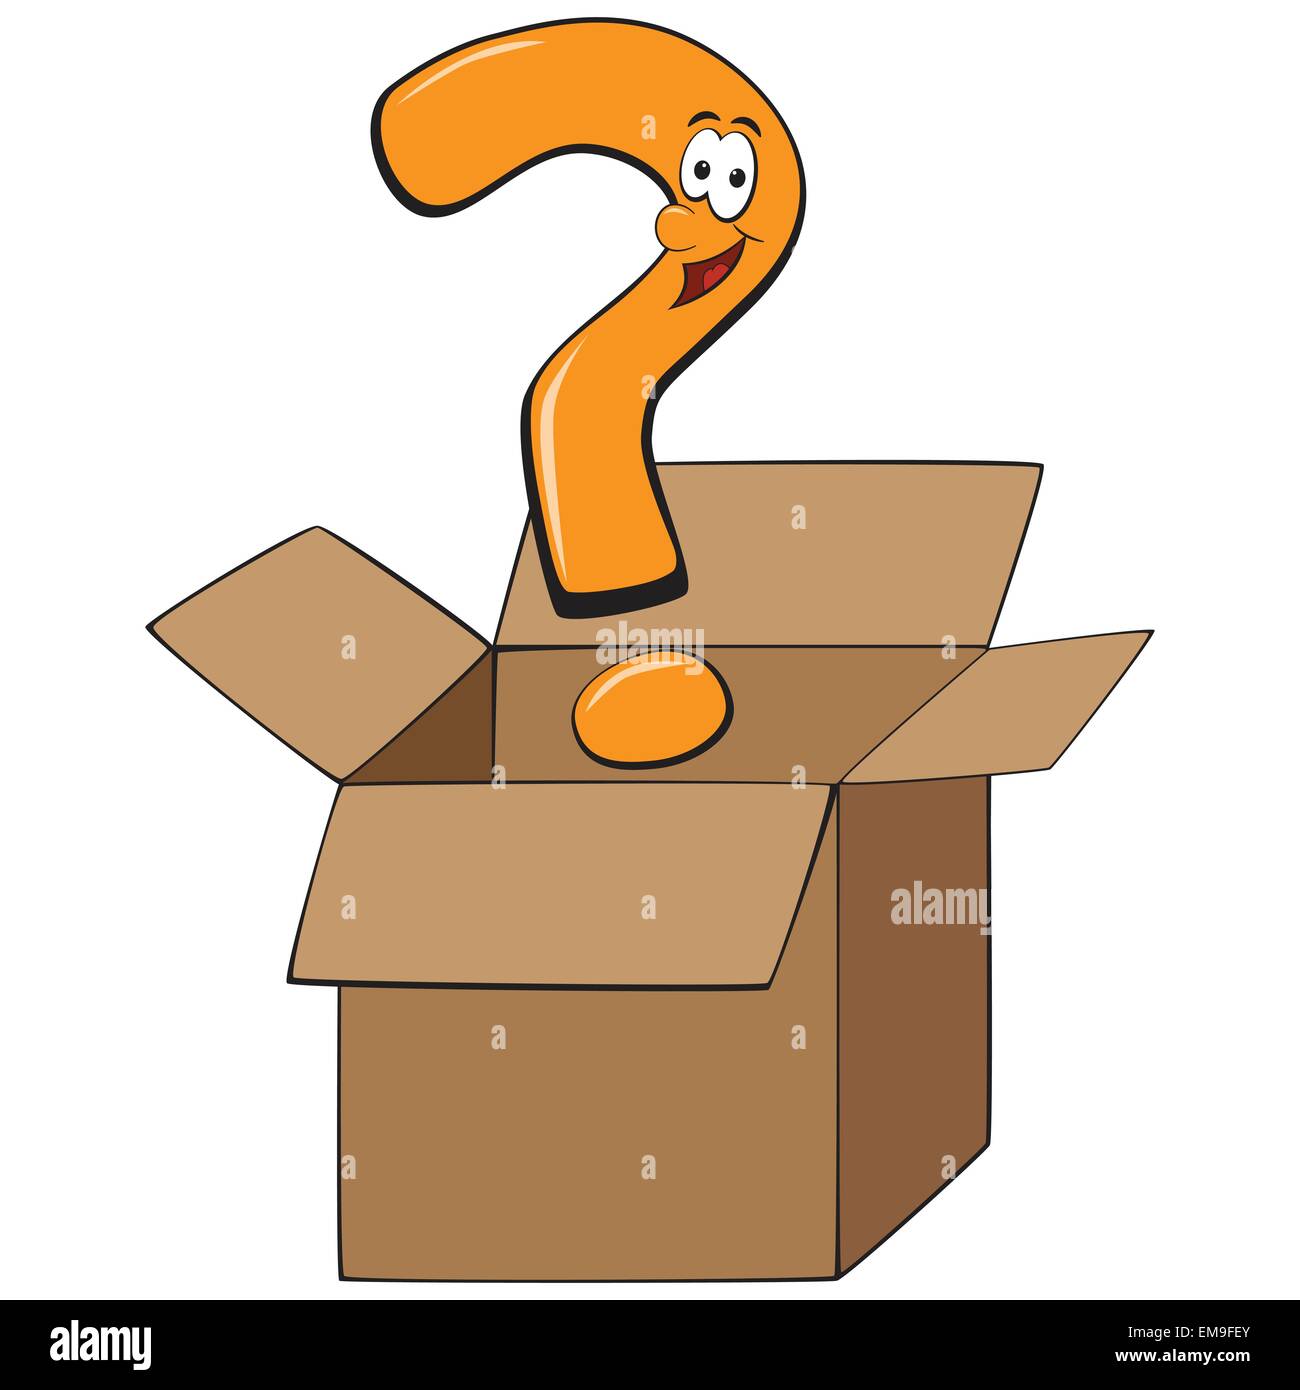 Cartoon question mark thinking outside of the box Stock Vector Art ...